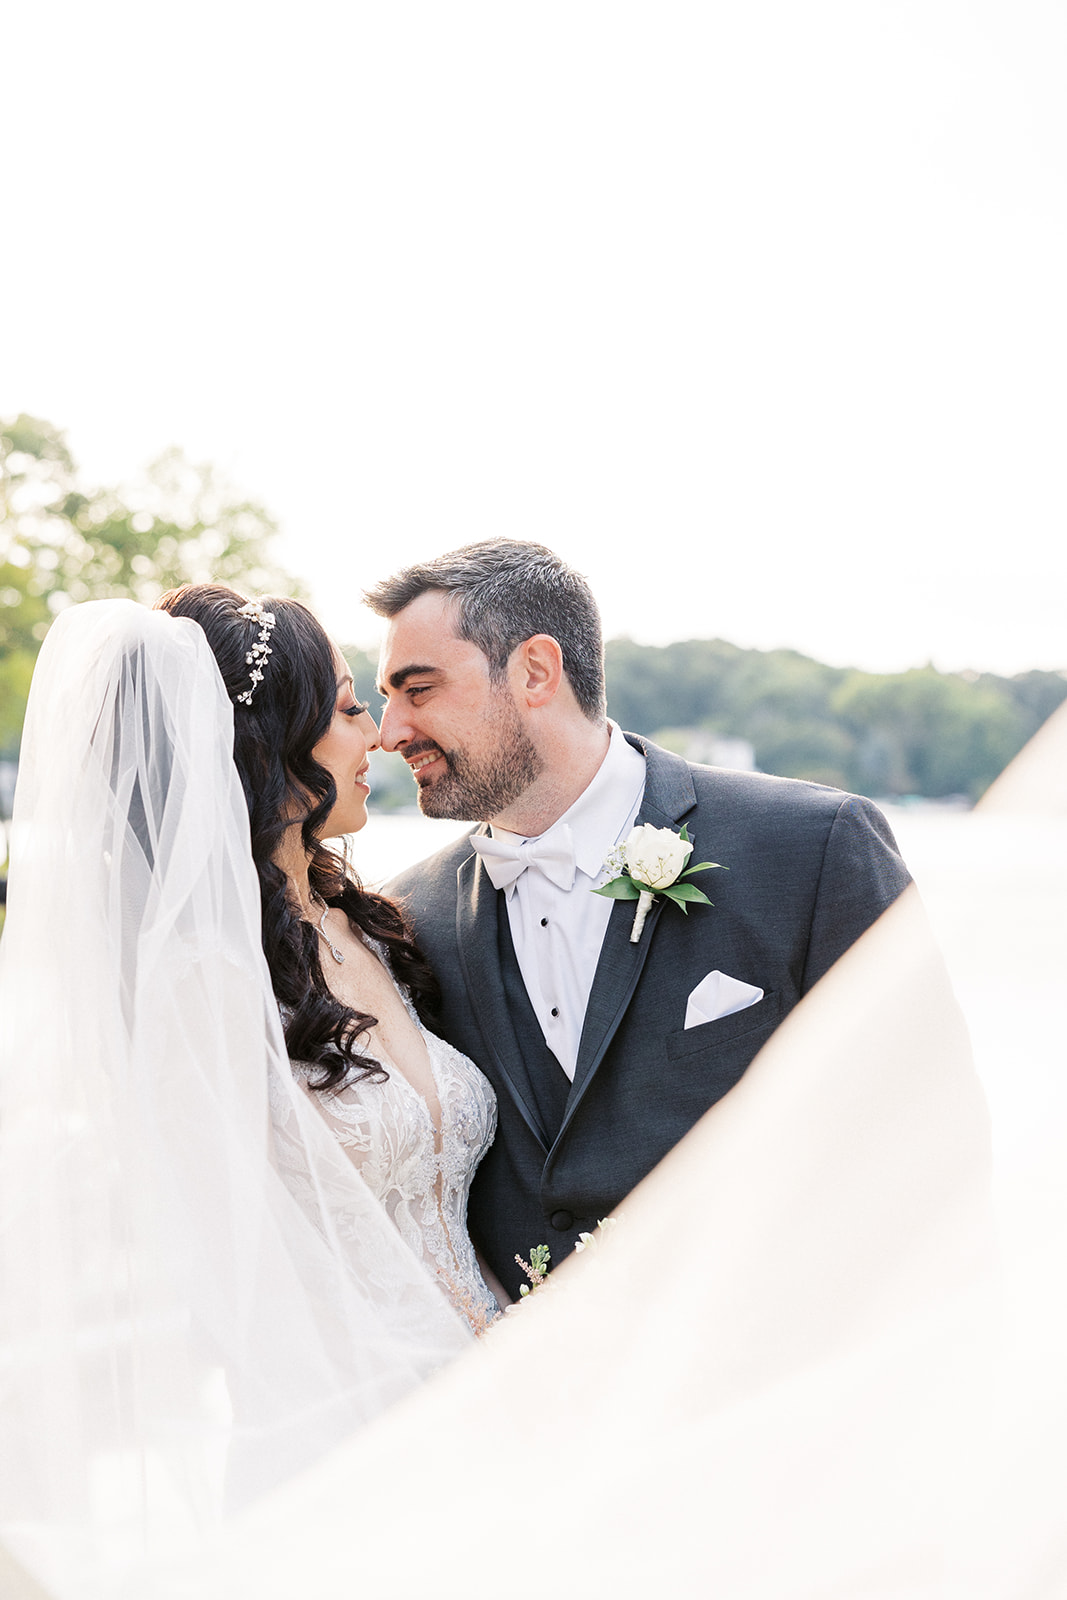 Newlyweds touch noses while standing by a lake